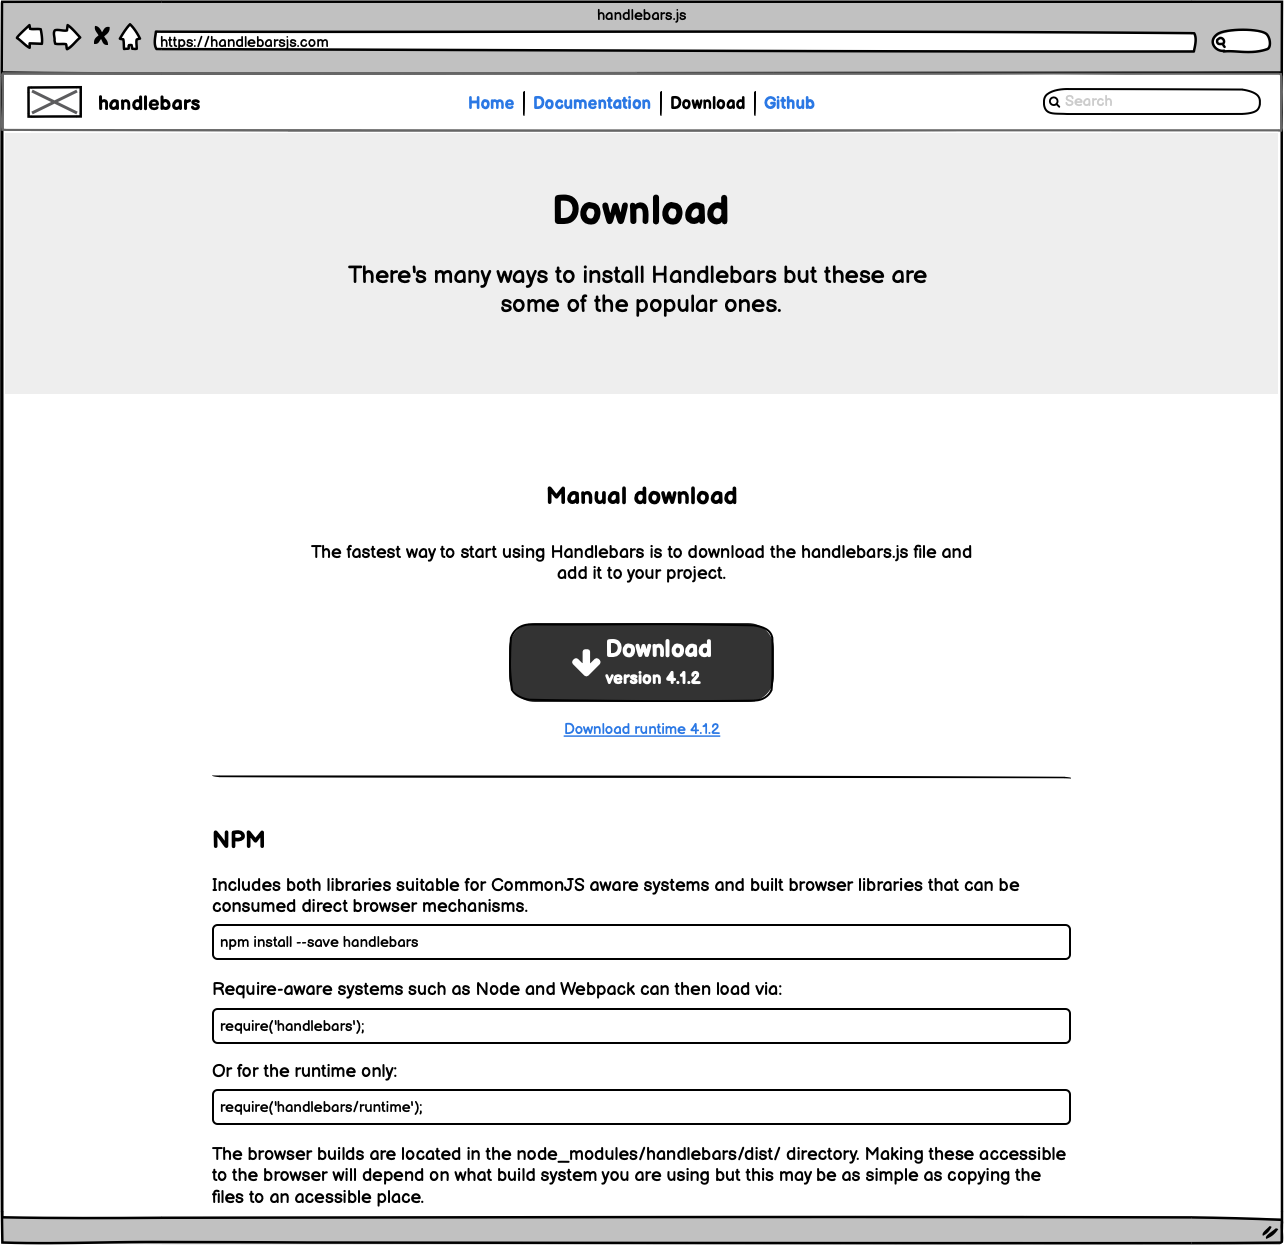 Wireframe of download page